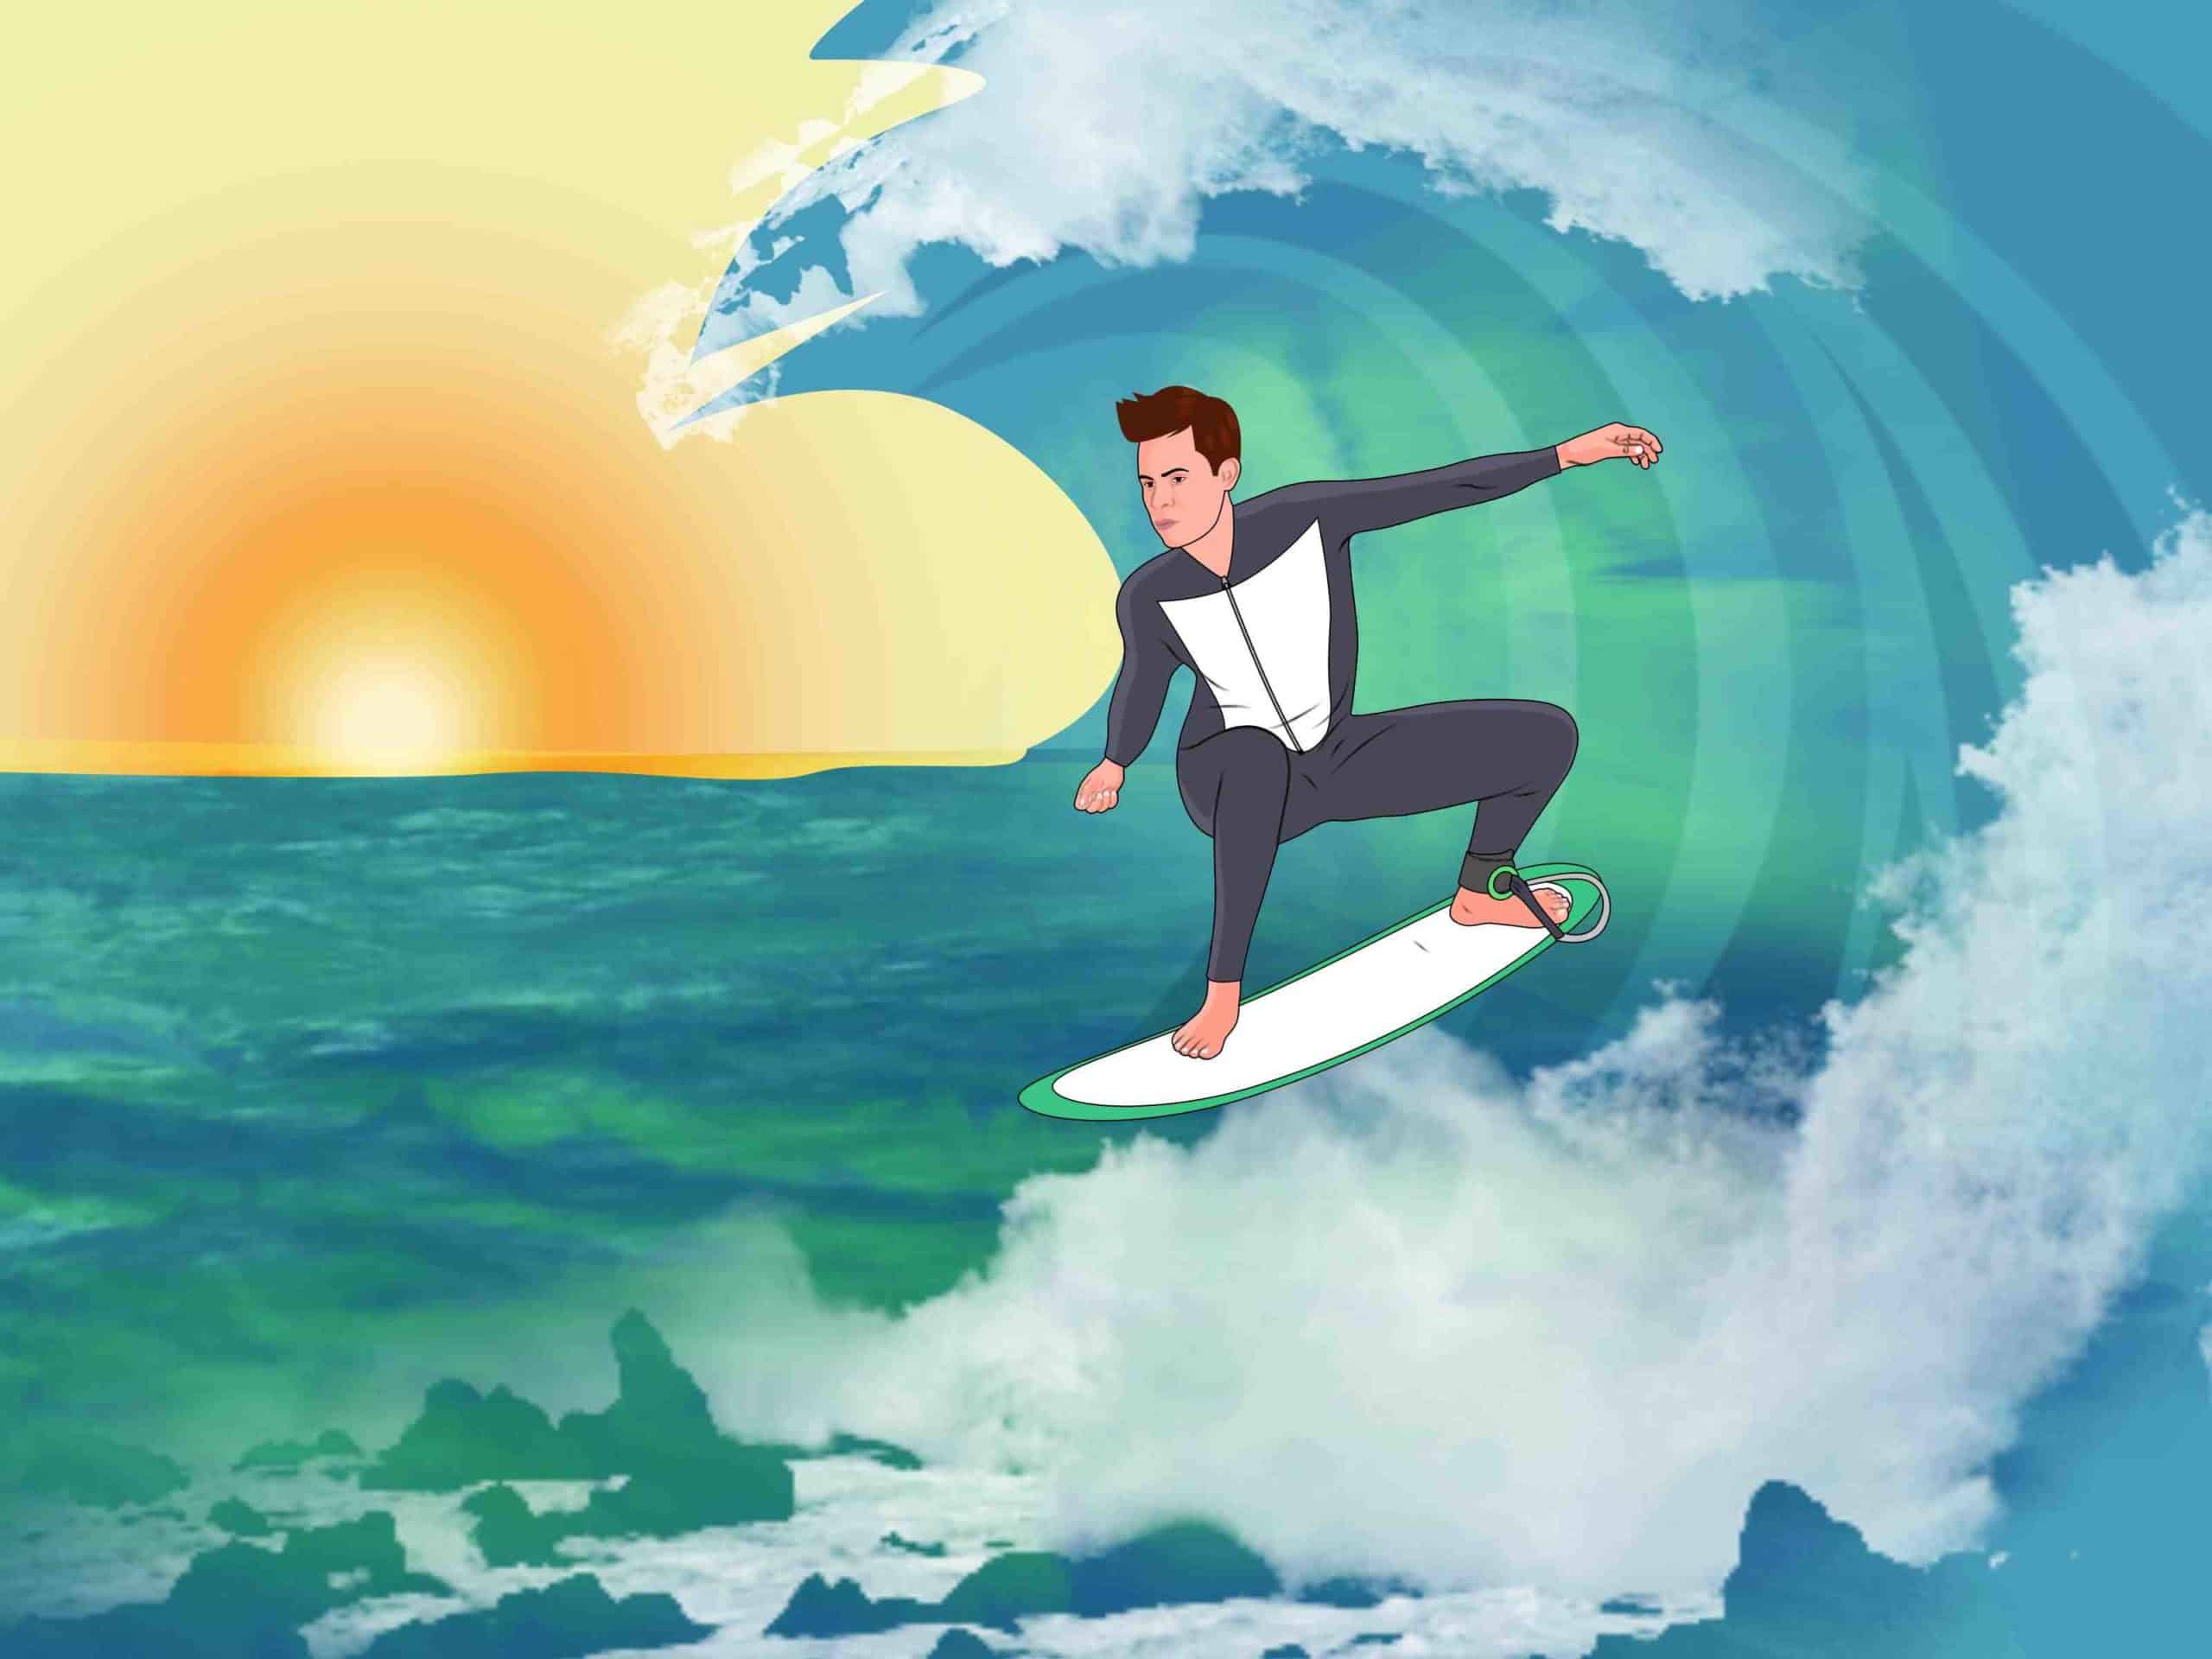 Can I learn to surf at 50?